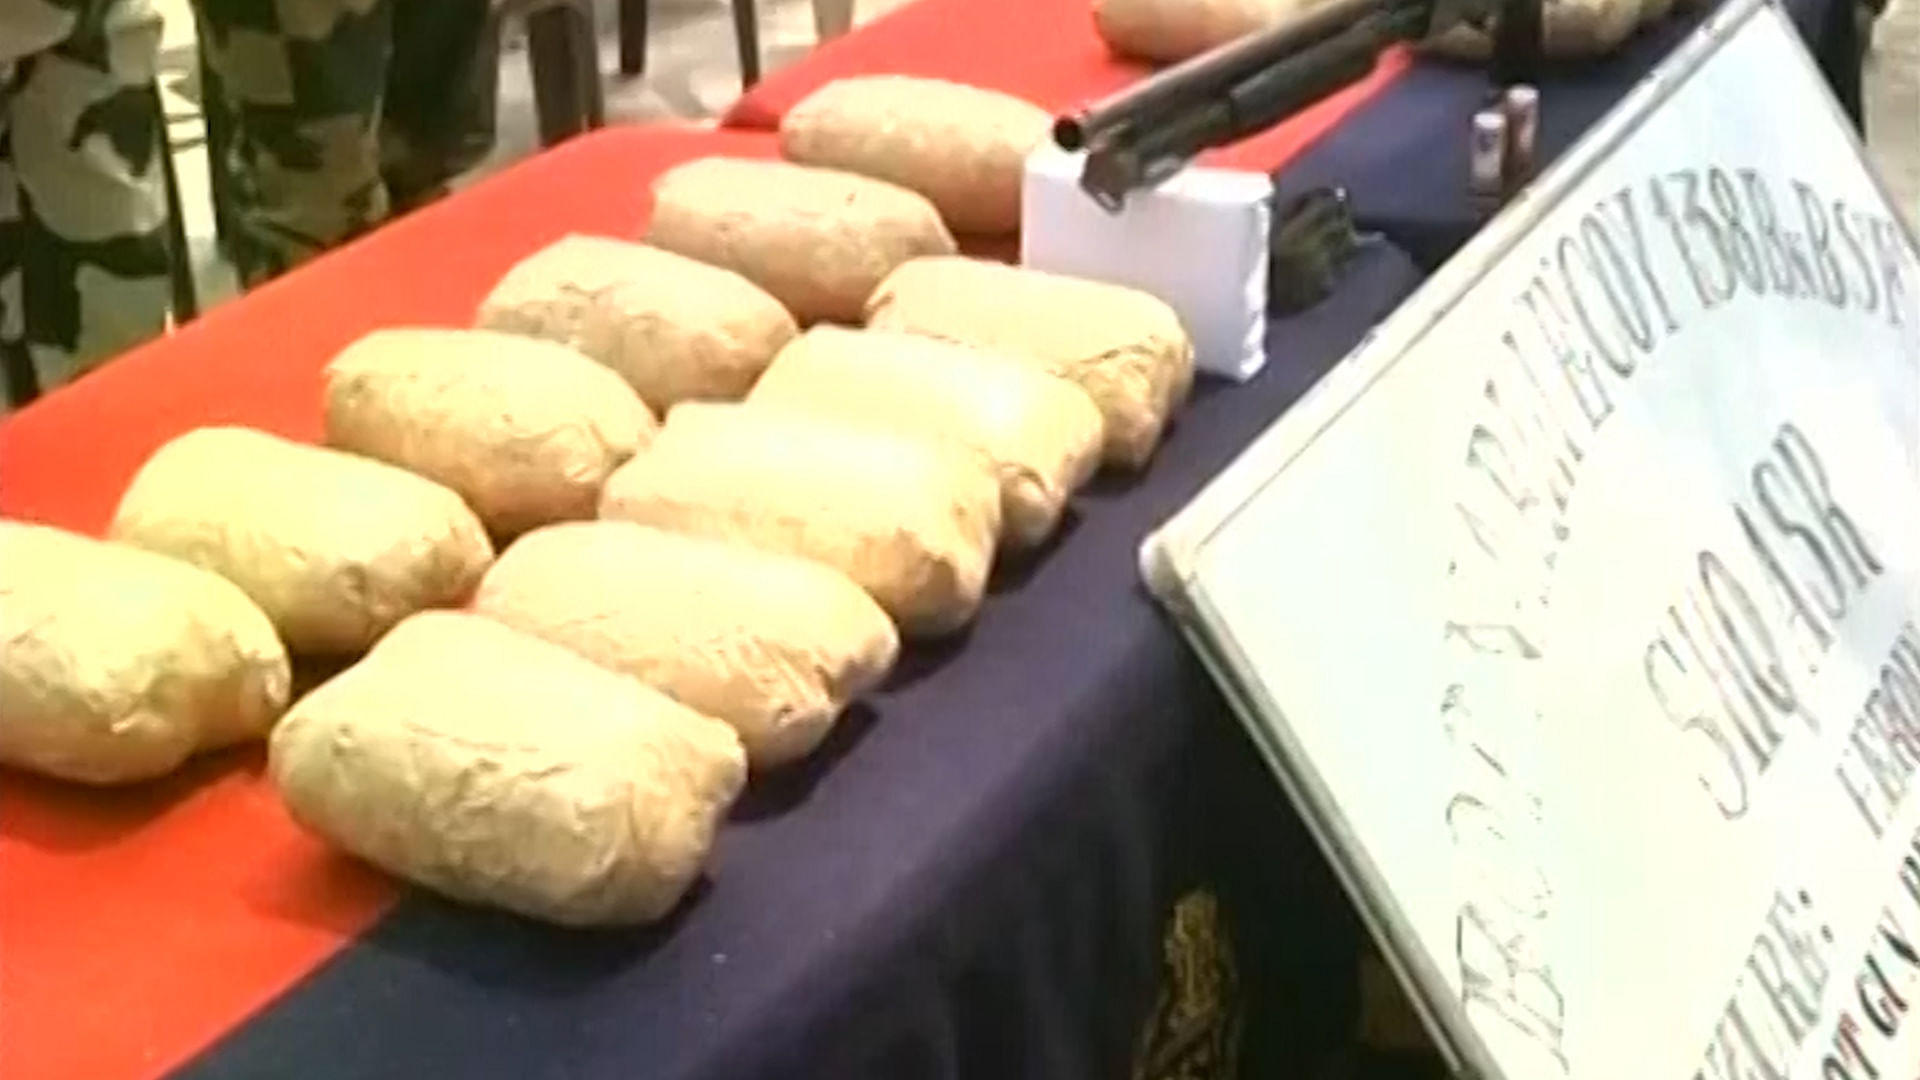 Heroin and ammunition seized from the smugglers. (Photo: ANI screengrab)